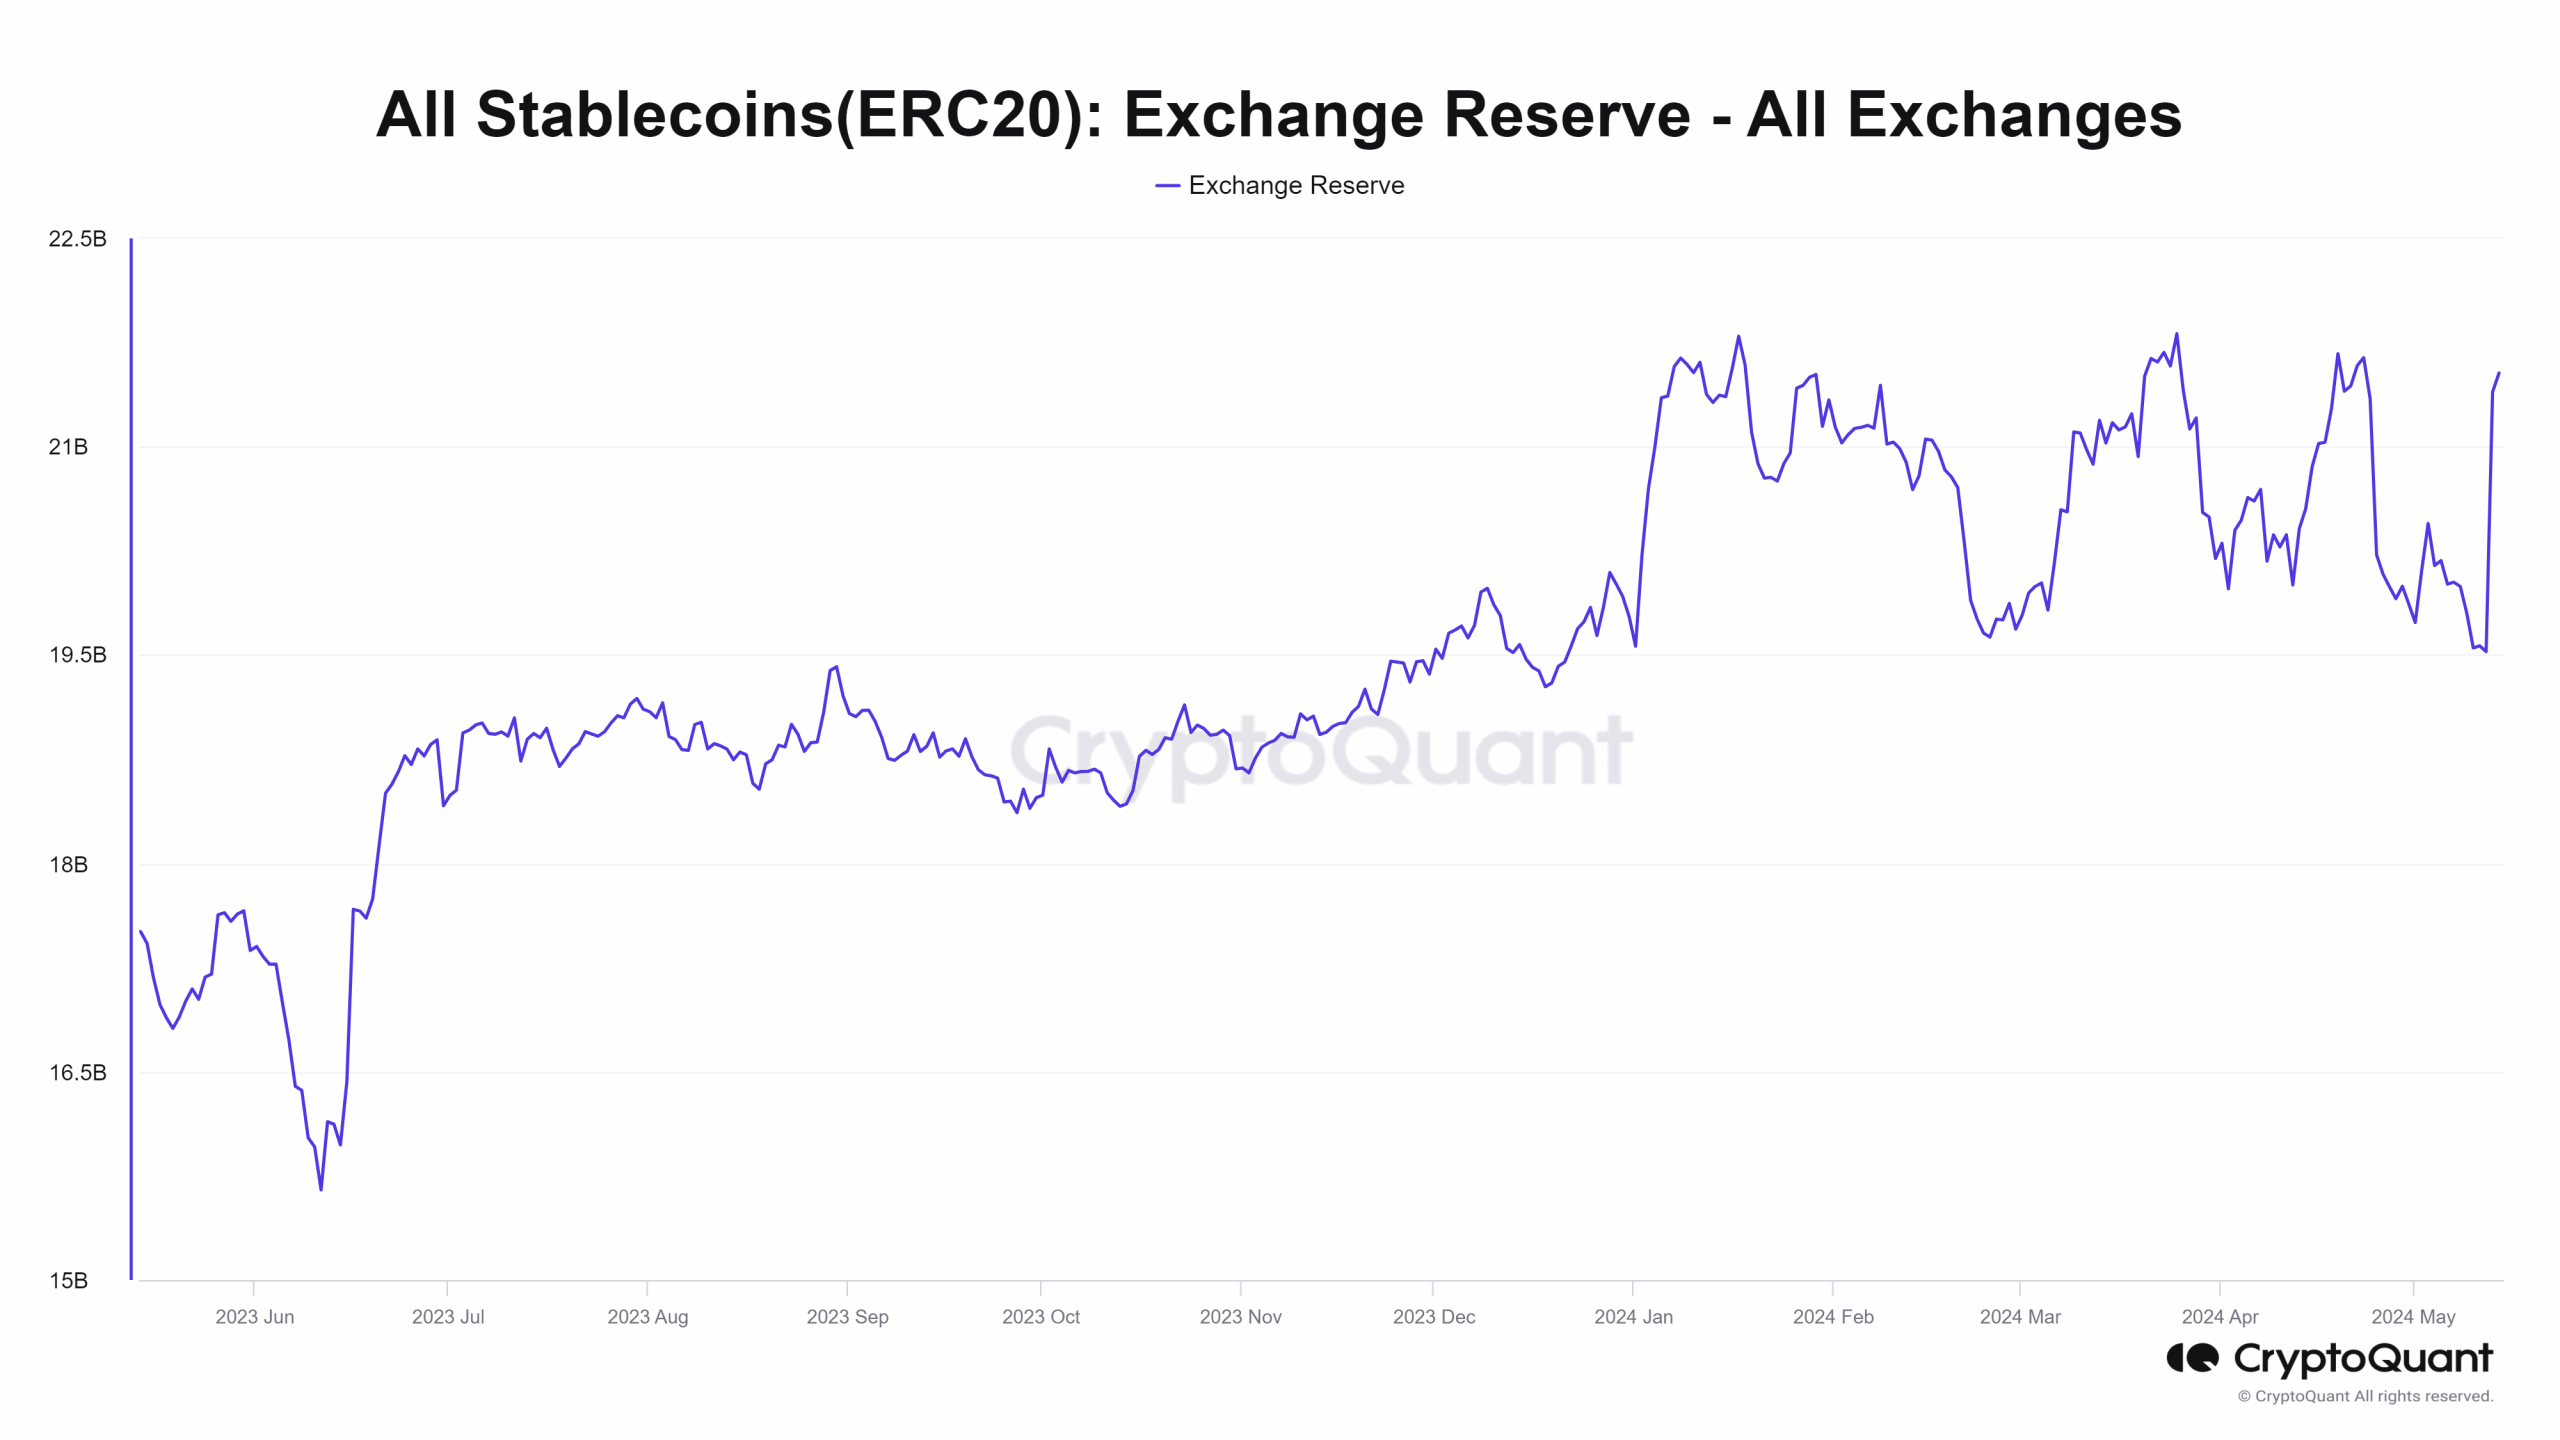 Stablecoin Exchange Reserve